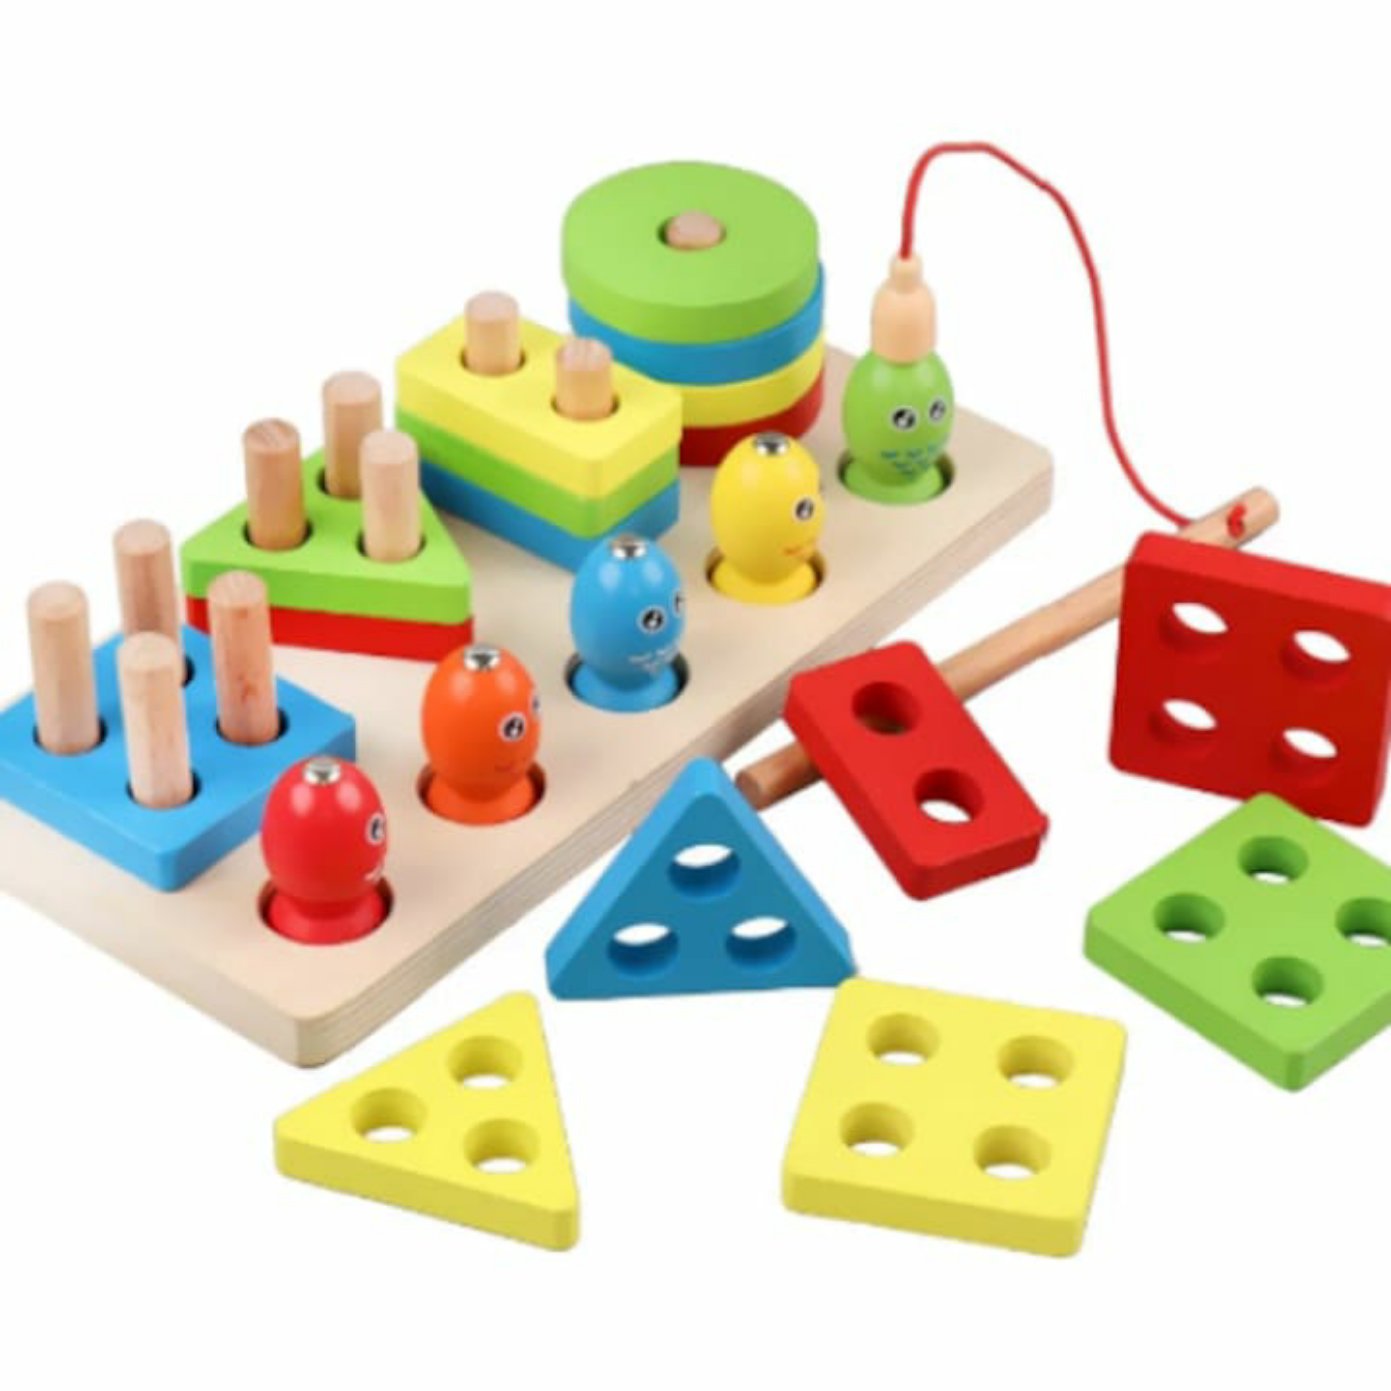 🐼🐻🐵Four Color Wooden Animal Logic Game🐱🐰